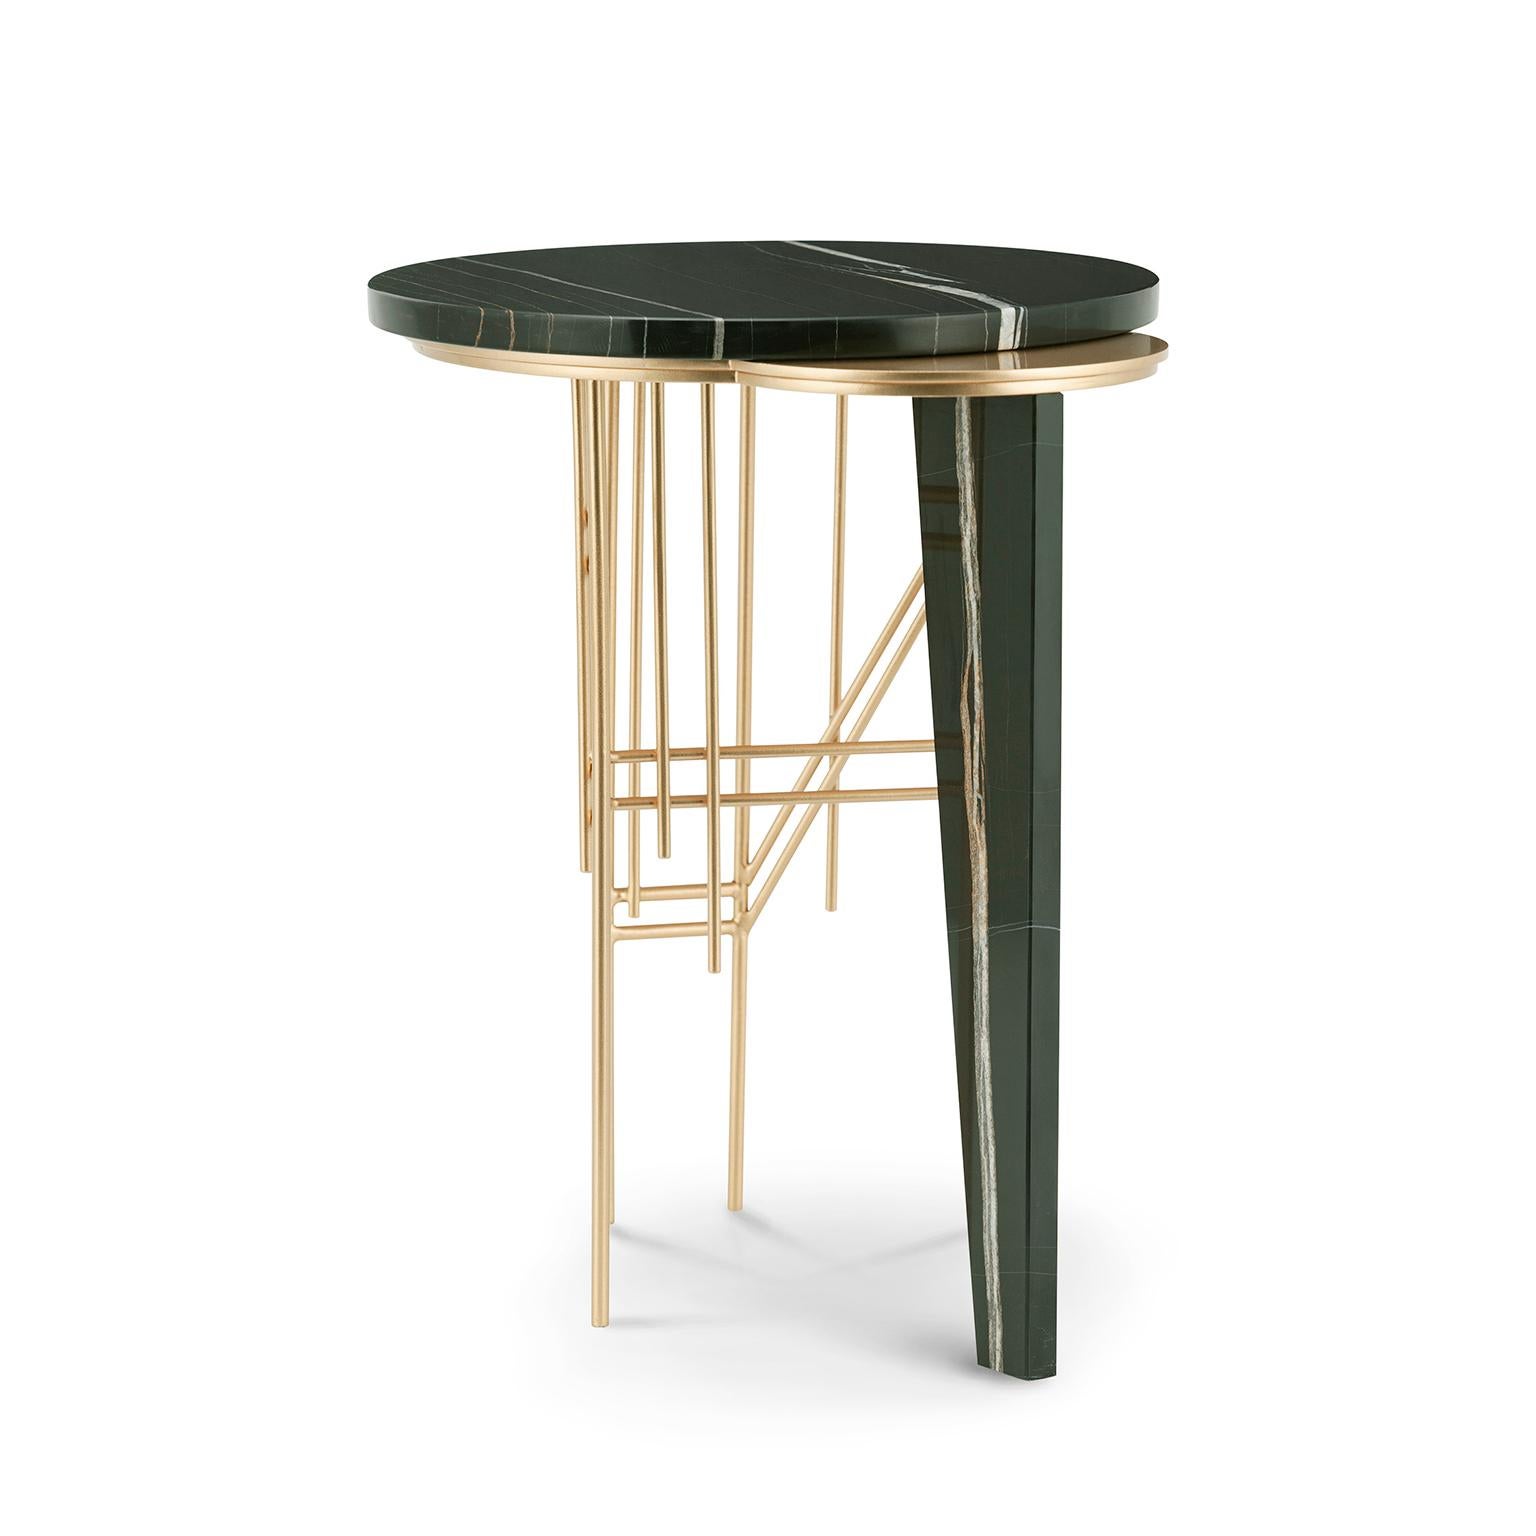 Palafita Side Table, Contemporary Collection, Handcrafted in Portugal - Europe by Greenapple.

The Palafita marble side table is inspired by the delicate yet resilient nature of stilts architecture, symbolizing the strength that emerges from